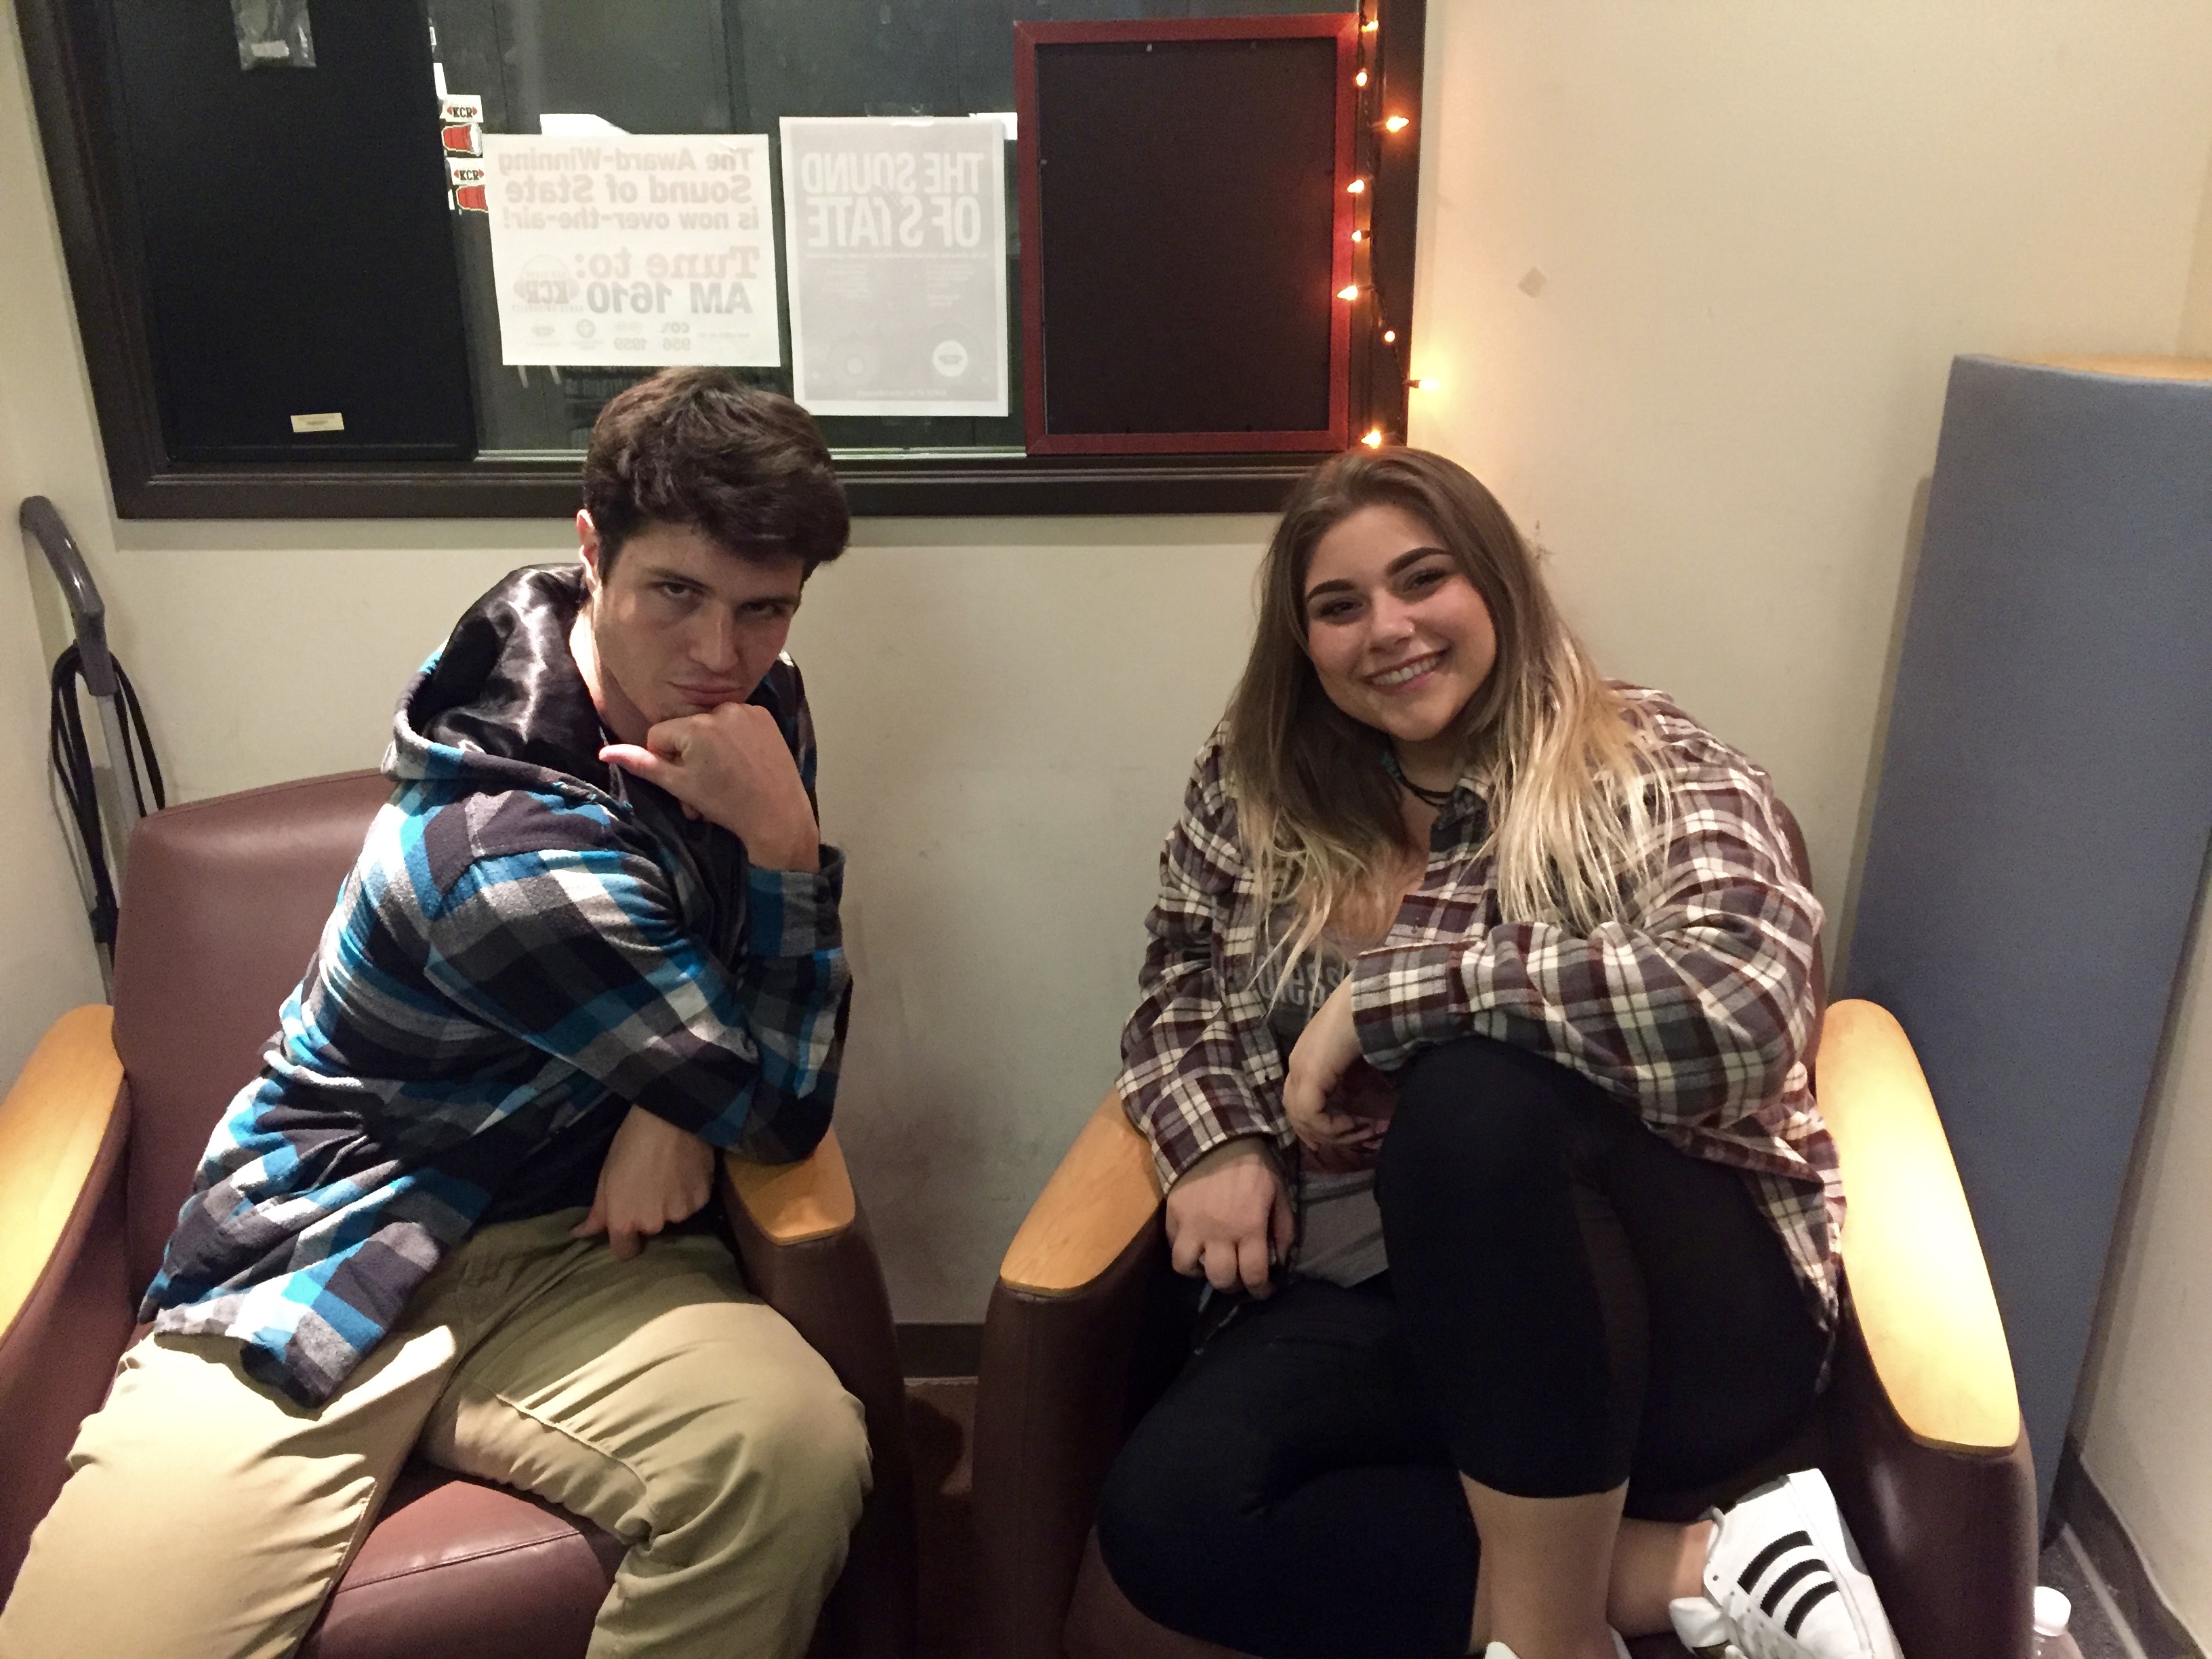 Jack and Tessa sitting in the KCR Studio.